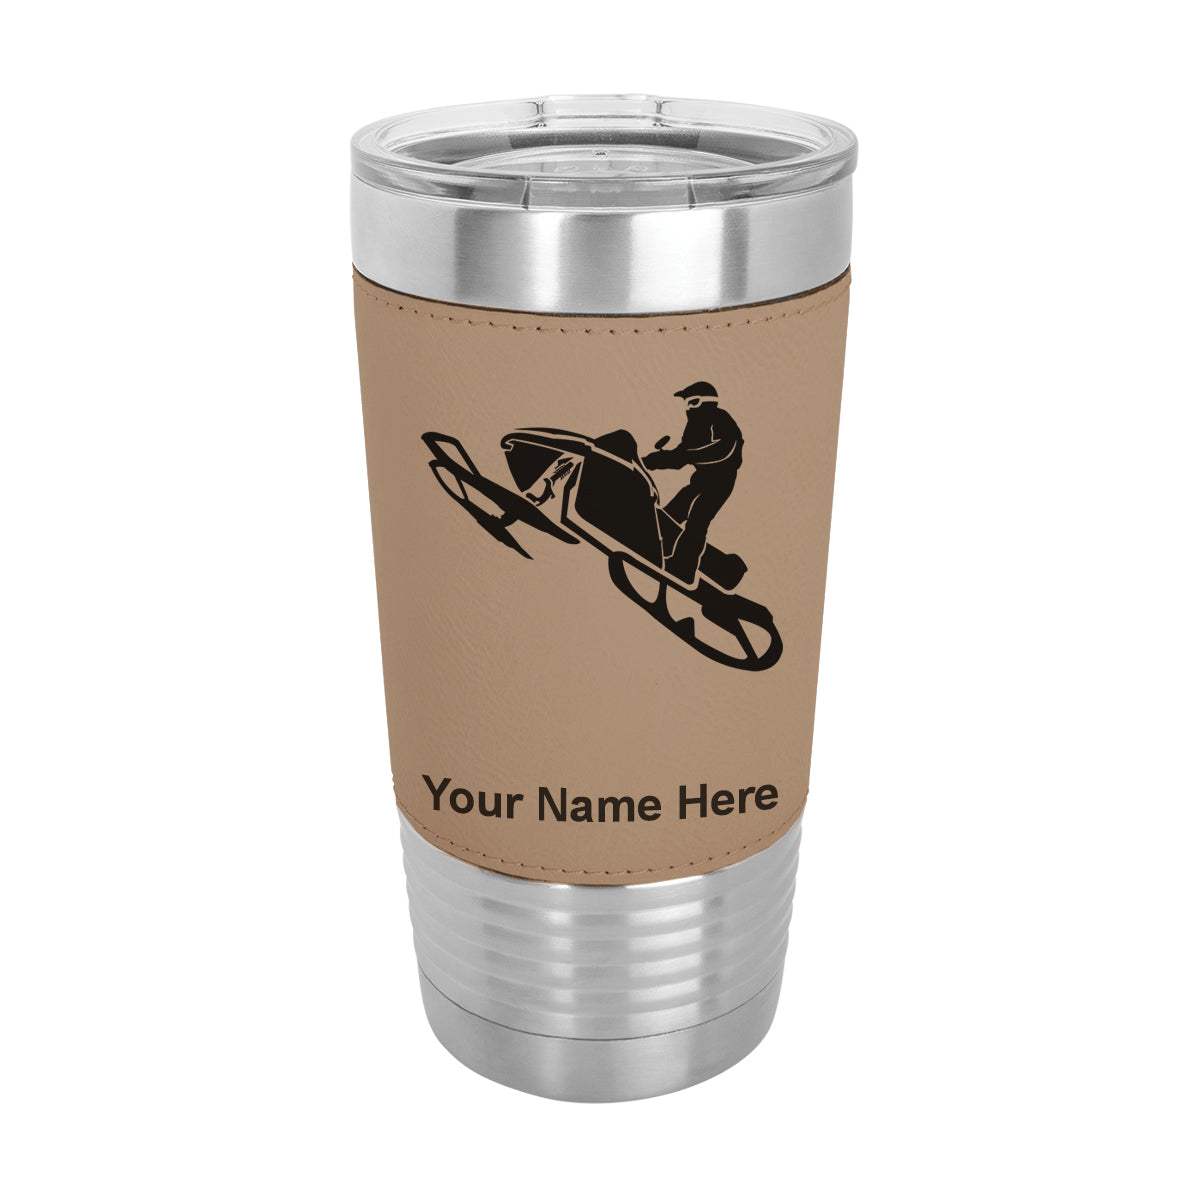 20oz Faux Leather Tumbler Mug, Snowmobile, Personalized Engraving Included - LaserGram Custom Engraved Gifts